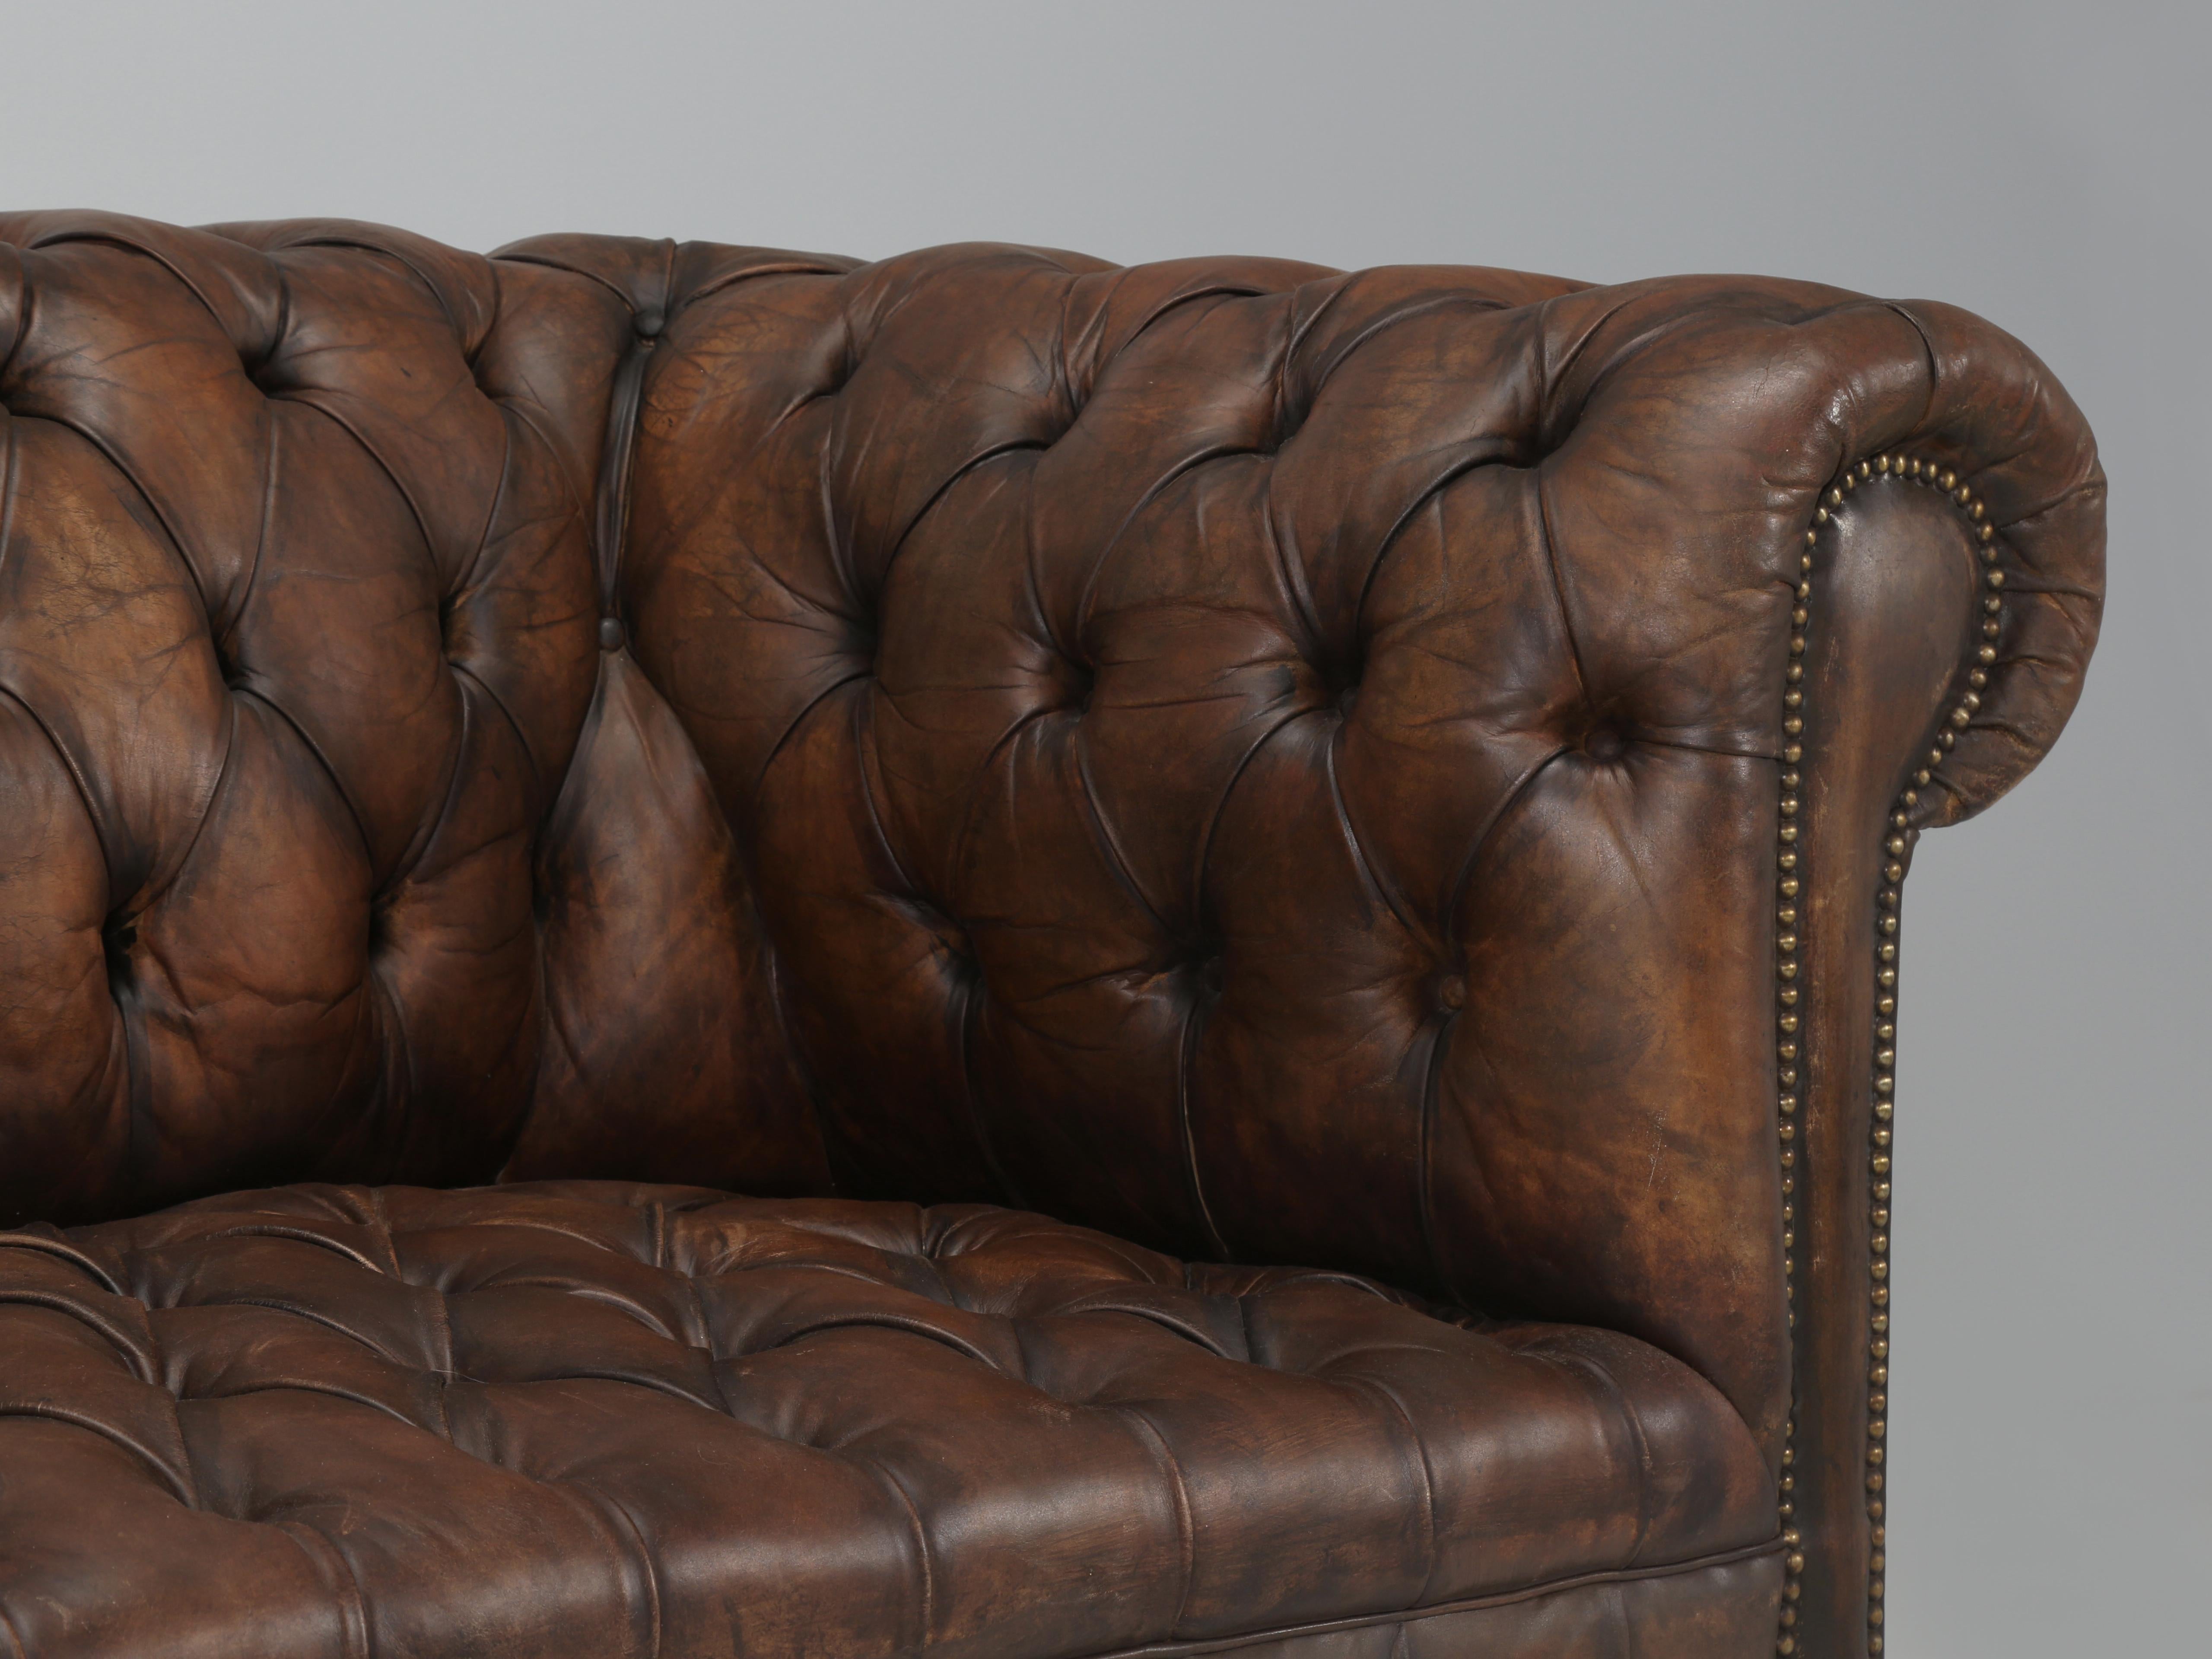 Mid-20th Century English Chesterfield Sofa Restored Internally Maintains Mostly Original Leather